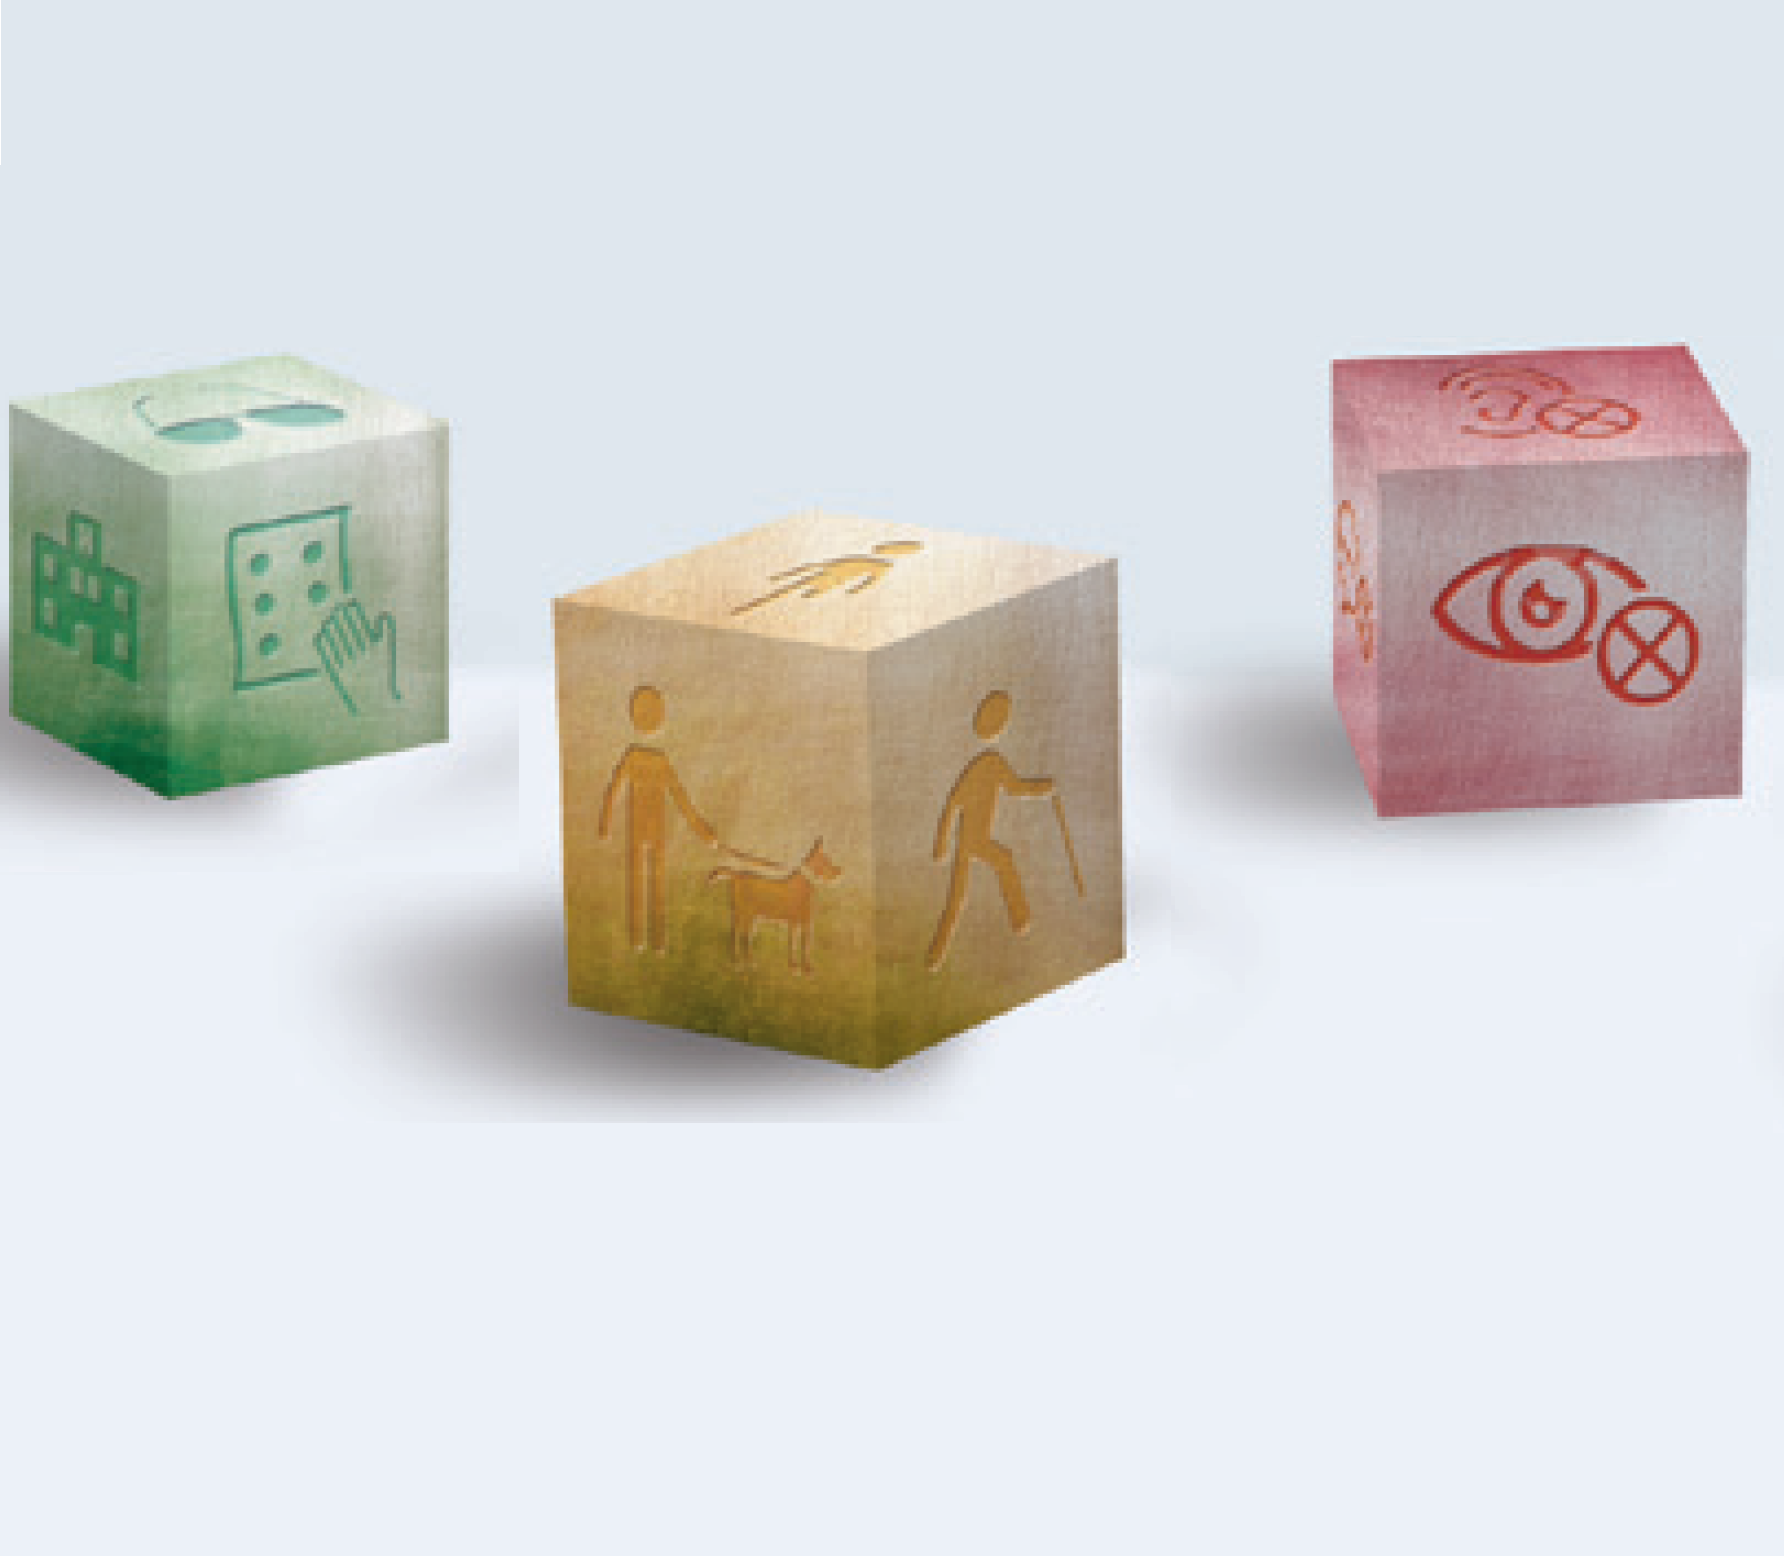 Coloured cubes with images of people with different disabilities printed on them